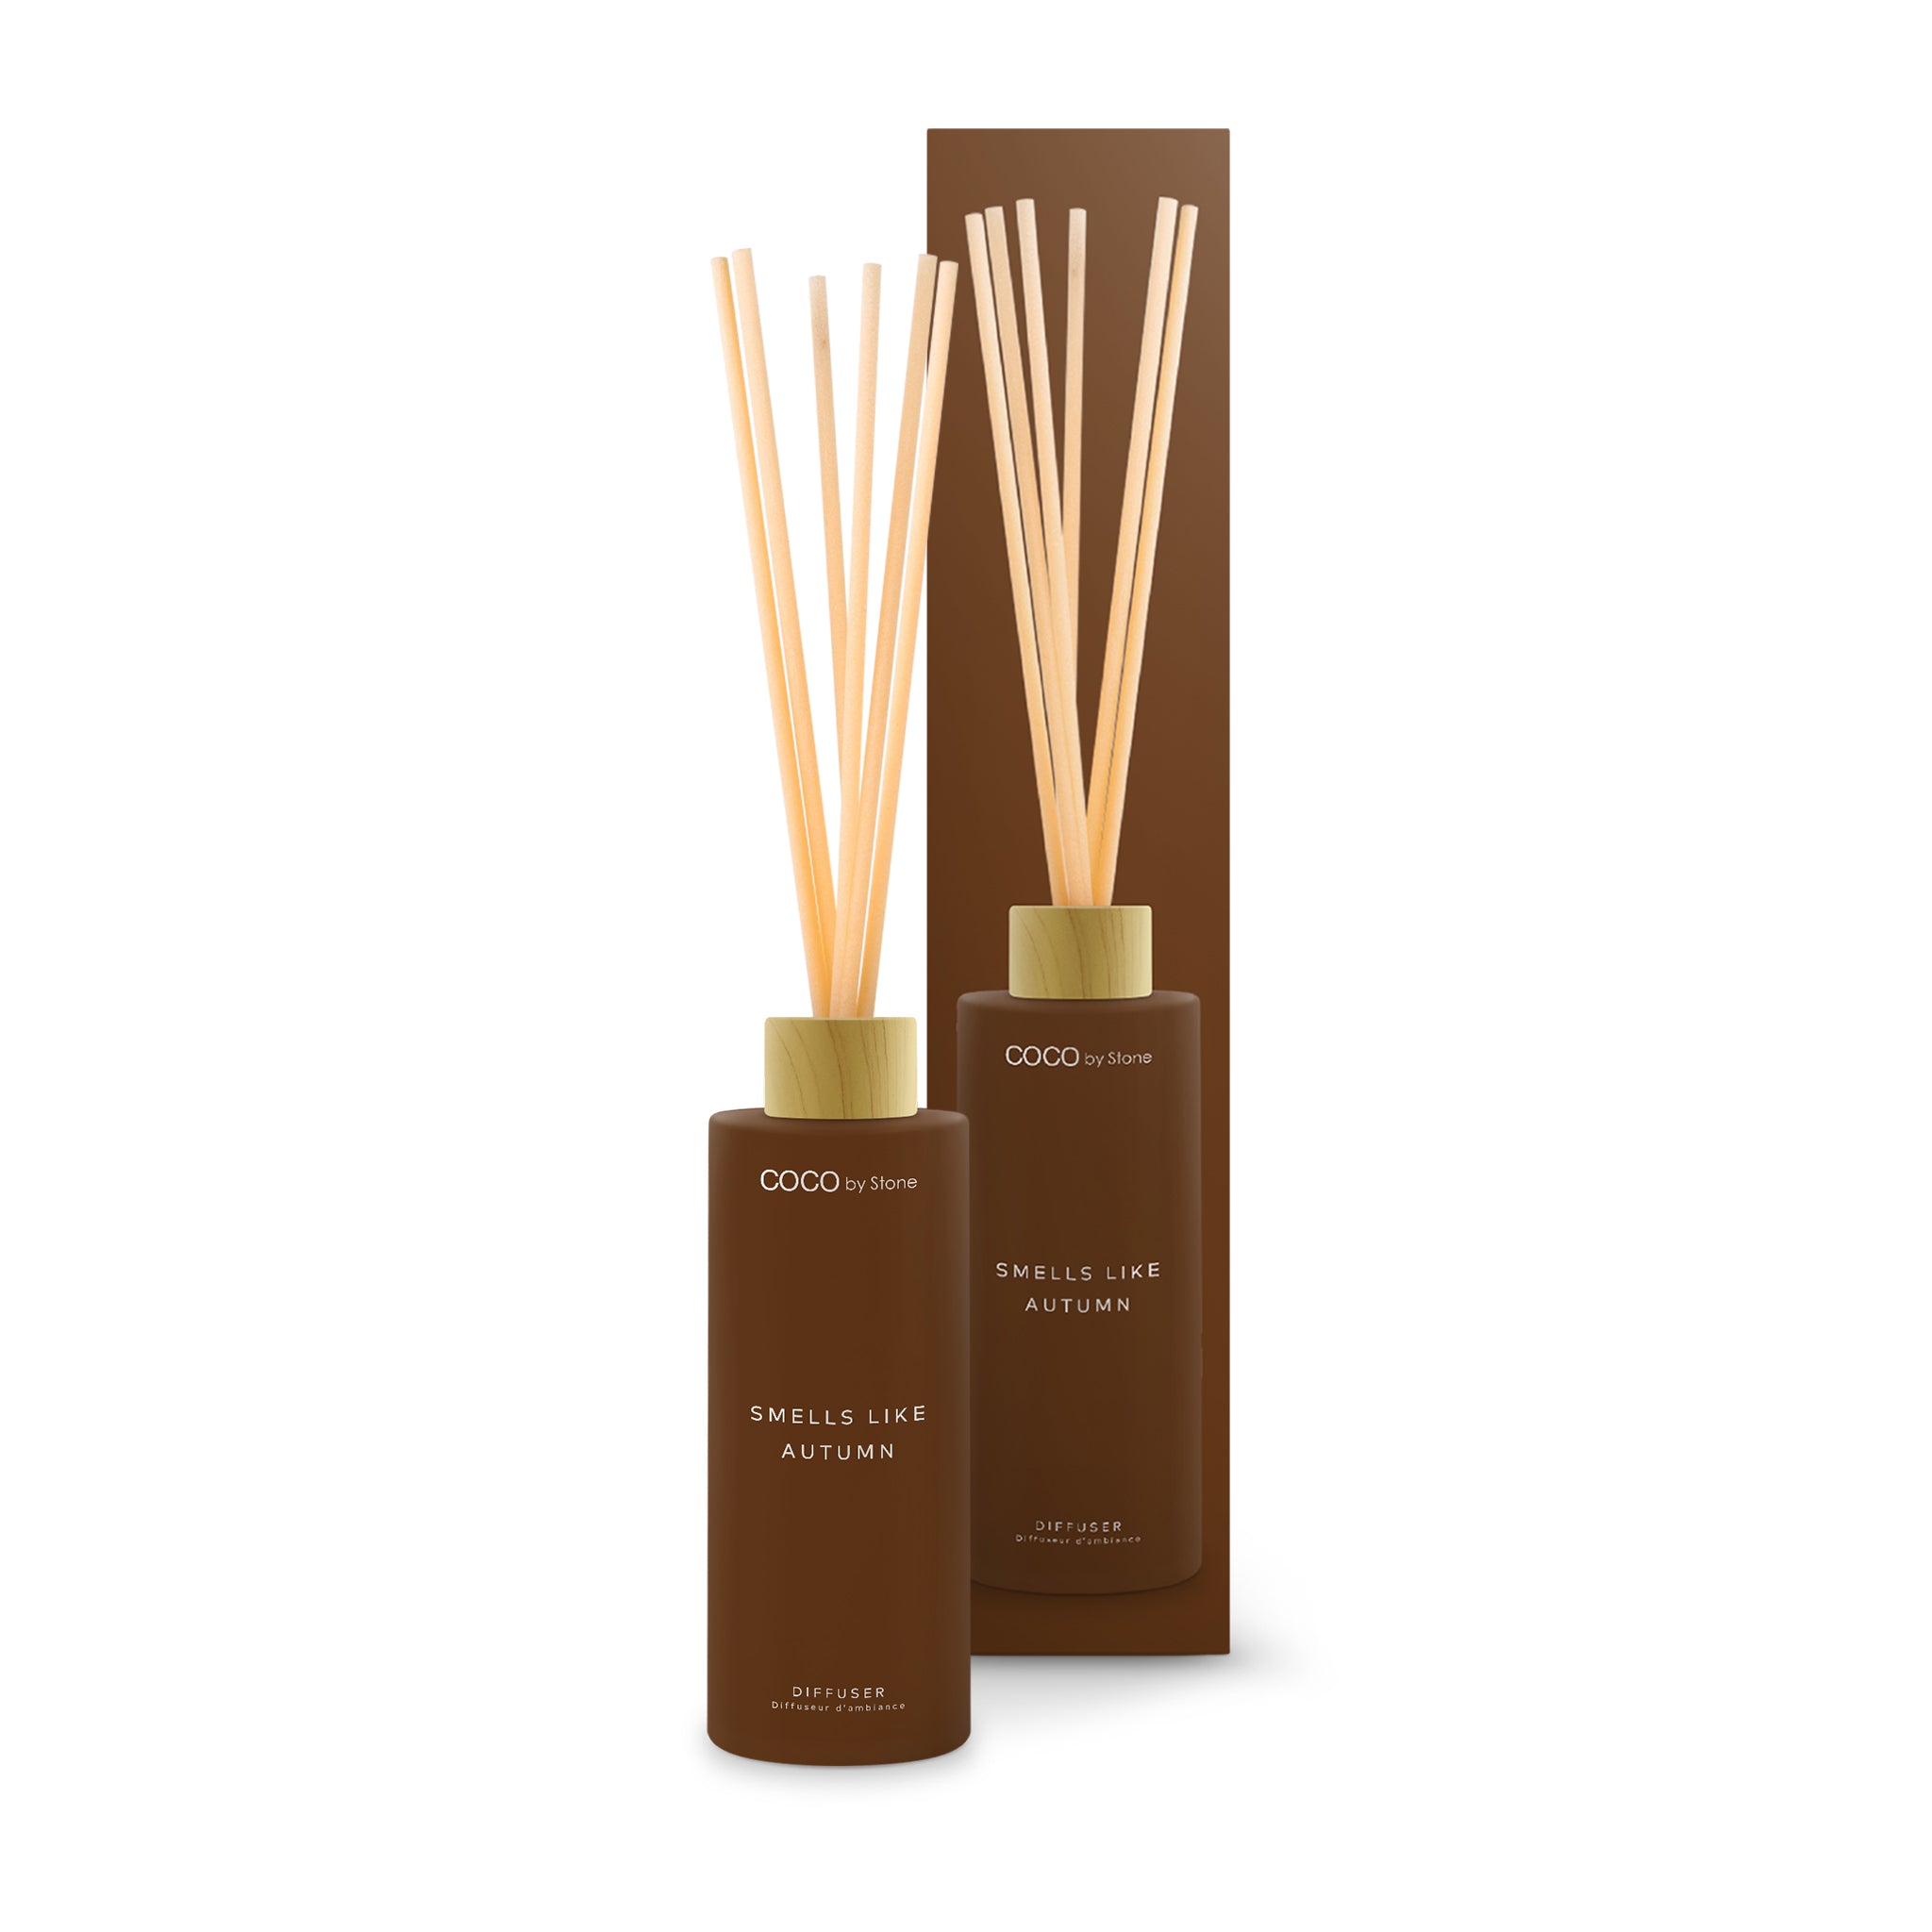 Coco by Stone Reed Diffusers Smells Like Autumn